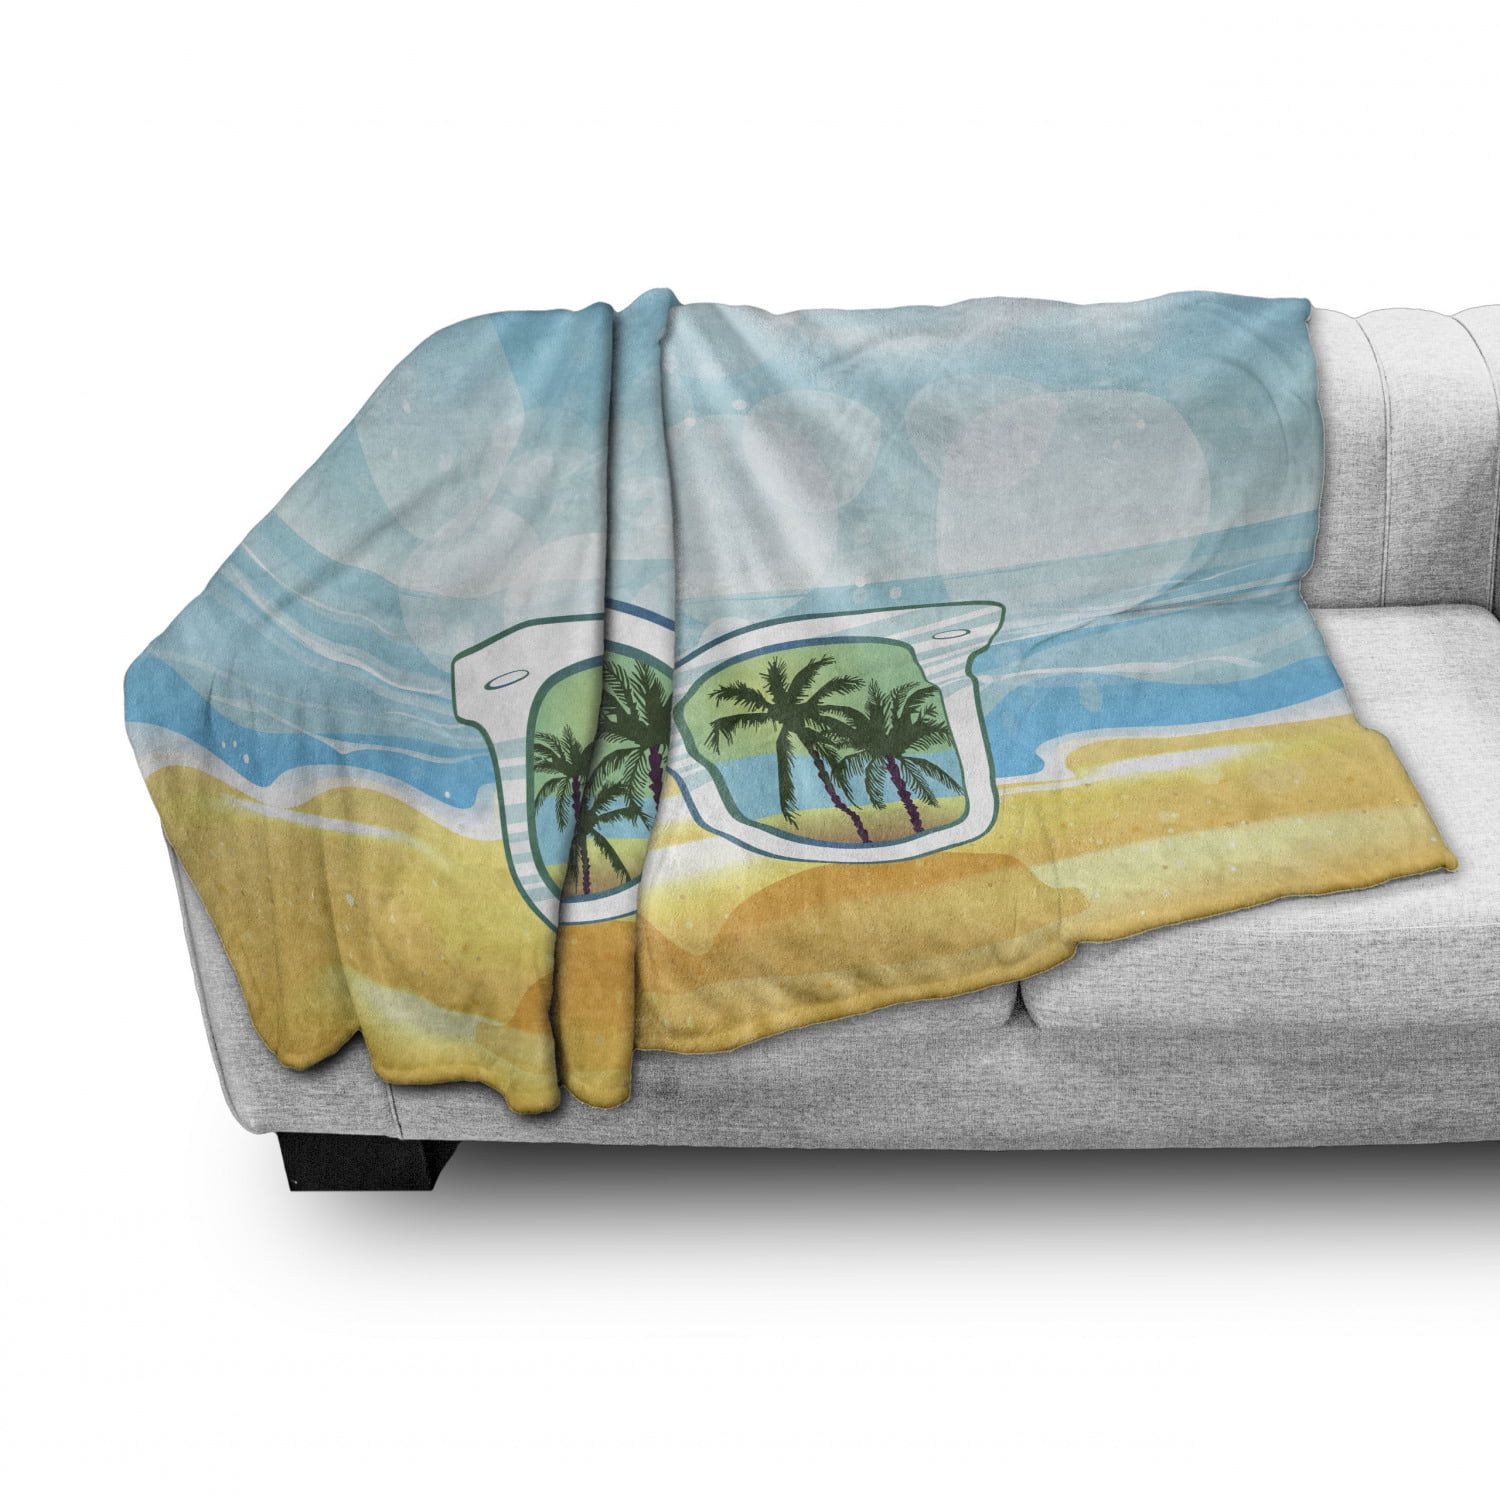 Ambesonne Tropical Soft Flannel Fleece Throw Blanket 60 x 80 Cozy Plush for Indoor and Outdoor Use Beach View on with Sunglasses Reflection Summer Time Joyful Holiday Baby Blue Mustard White